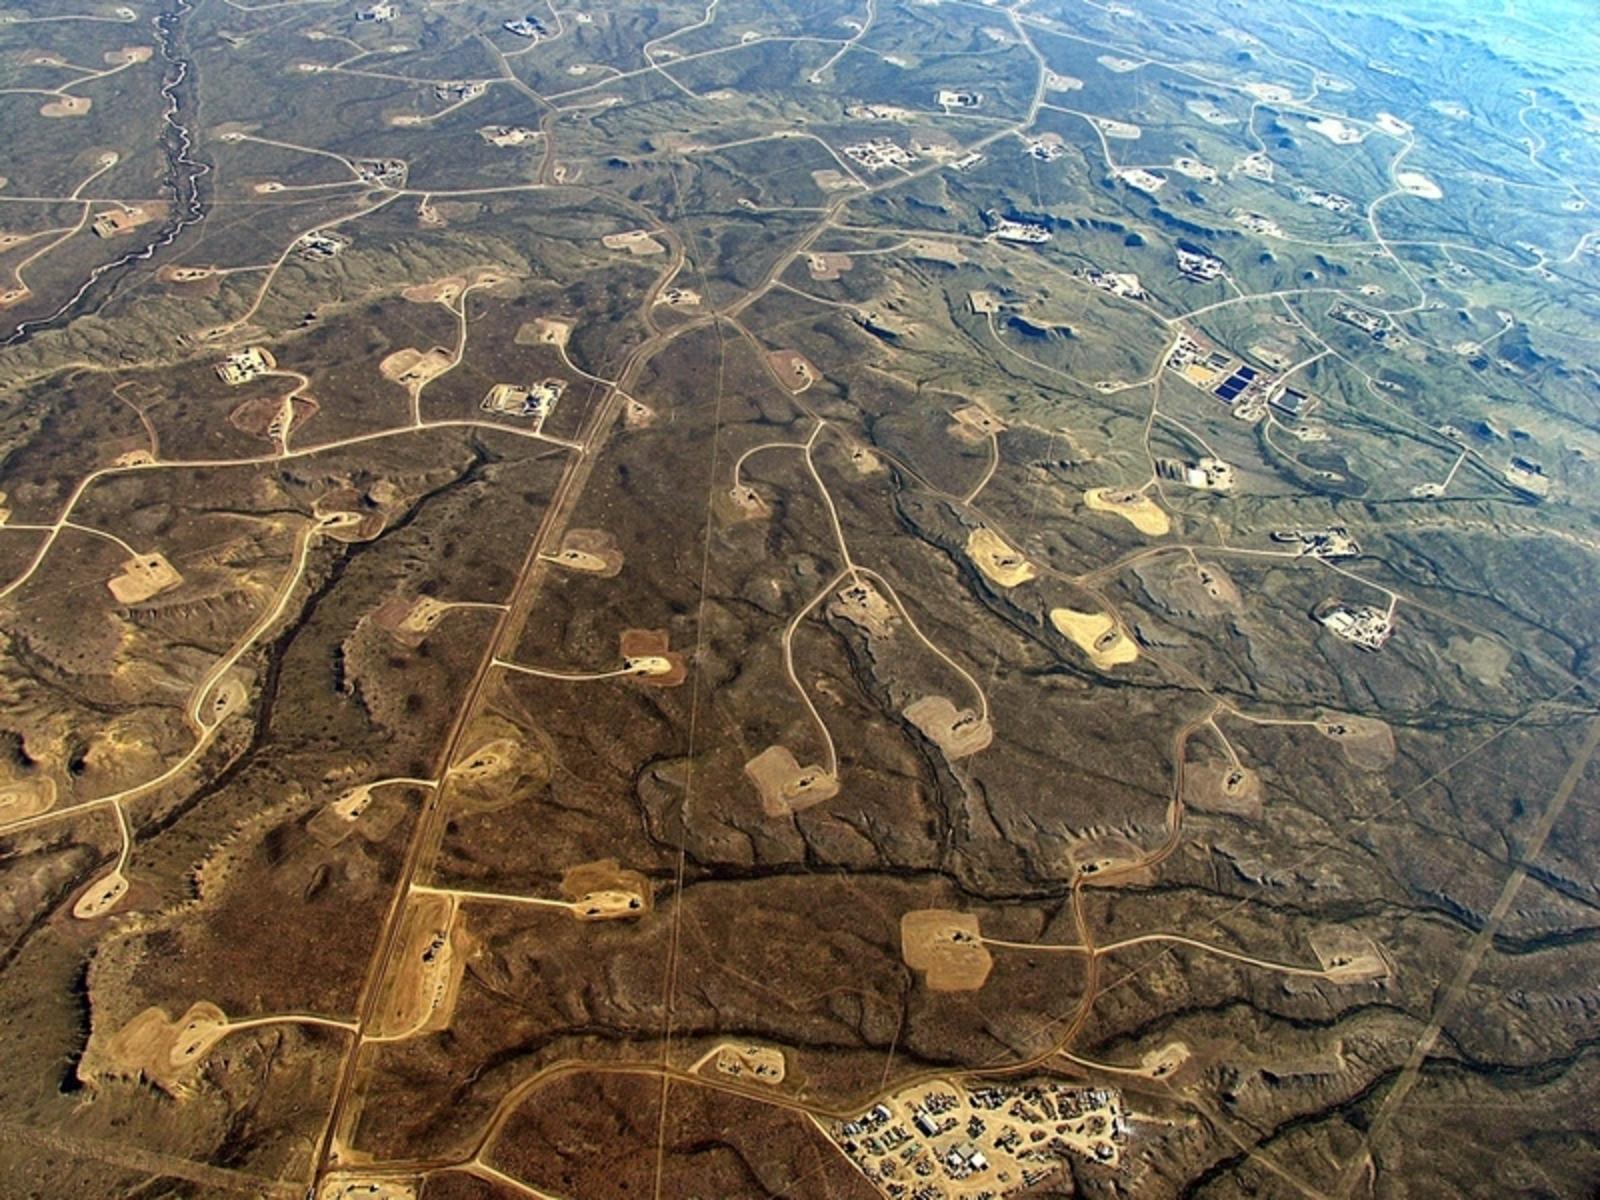 A glimpse at what full-field natural gas development looks like in the area around the Jonah Field and Pinedale Anticline in the southern reaches of the Greater Yellowstone Ecosystem. Wildlife officials have characterized it as a "sacrifice zone" that obliterated quality habitat for migratory species like pronghorn and mule deer. How will Interior Secretary Ryan Zinke try to square his desire for dramatically increasing fossil fuel development with claims he'll safeguard wildlife migration corridors and elsewhere in the West?  Photo courtesy Ecoflight (ecoflight.org)